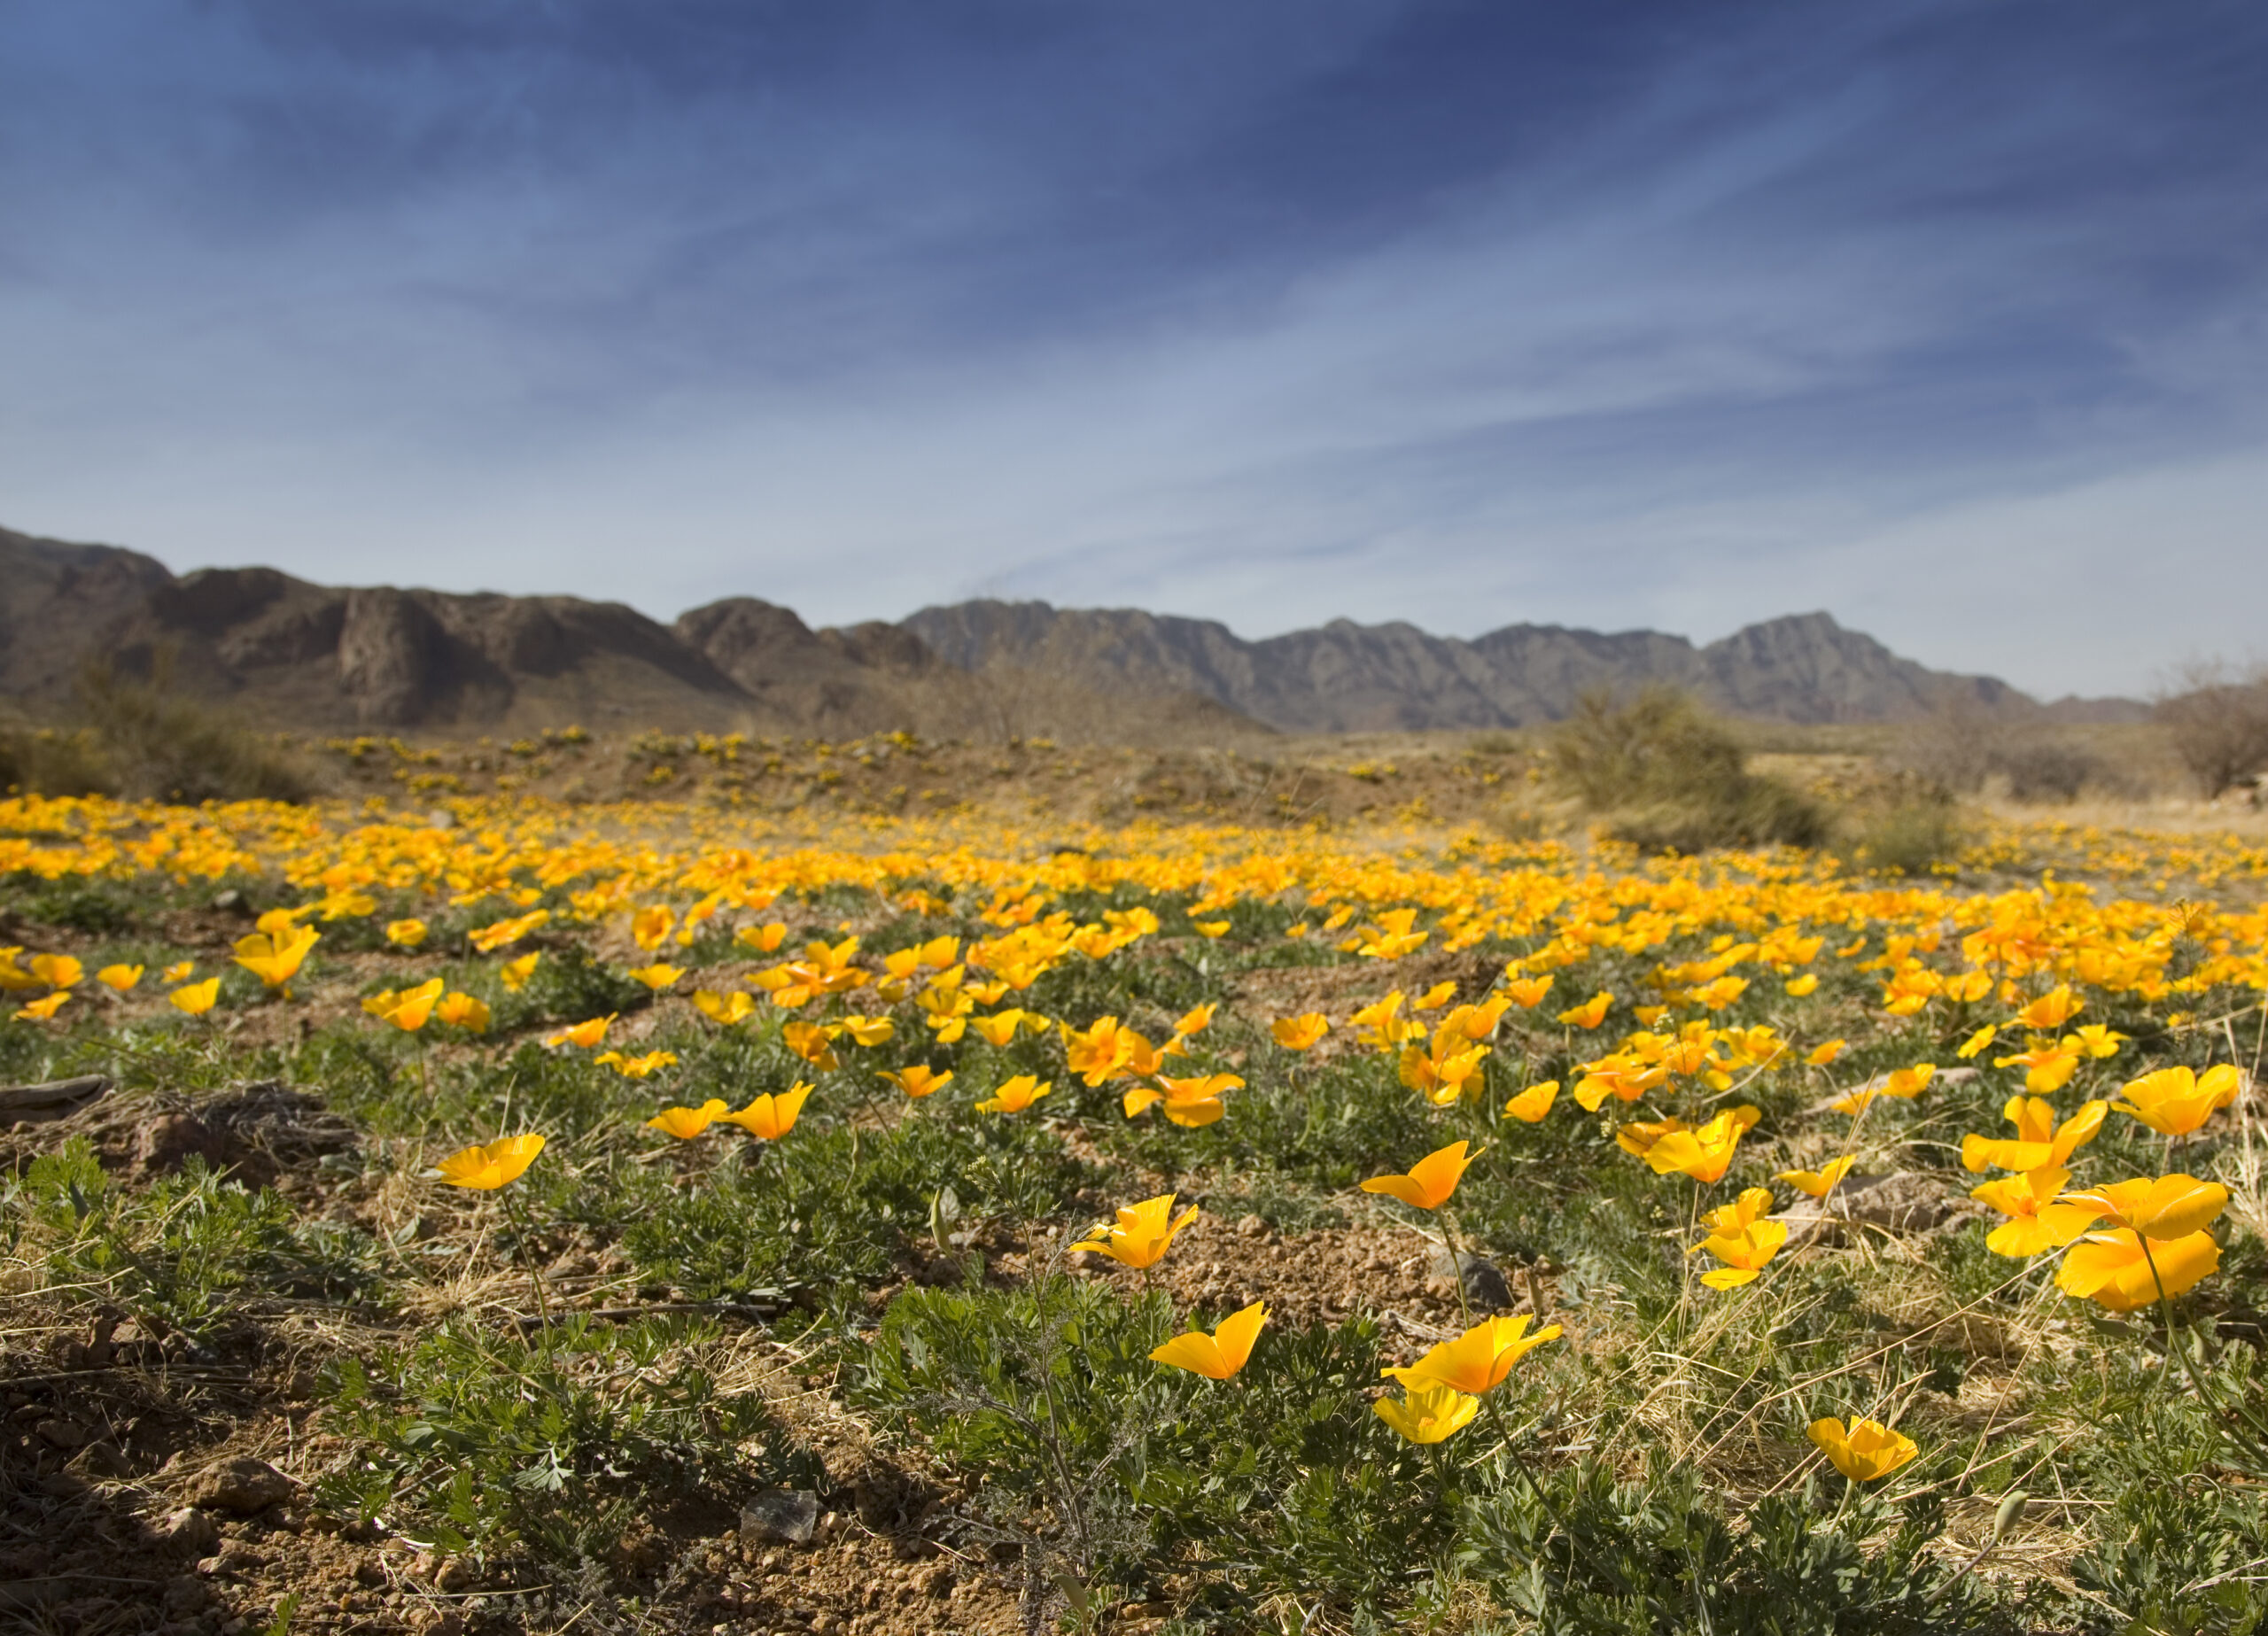 "Mexican Golden poppies bloom  in the Southwestern, Chihuahuan desert with mountains in background."